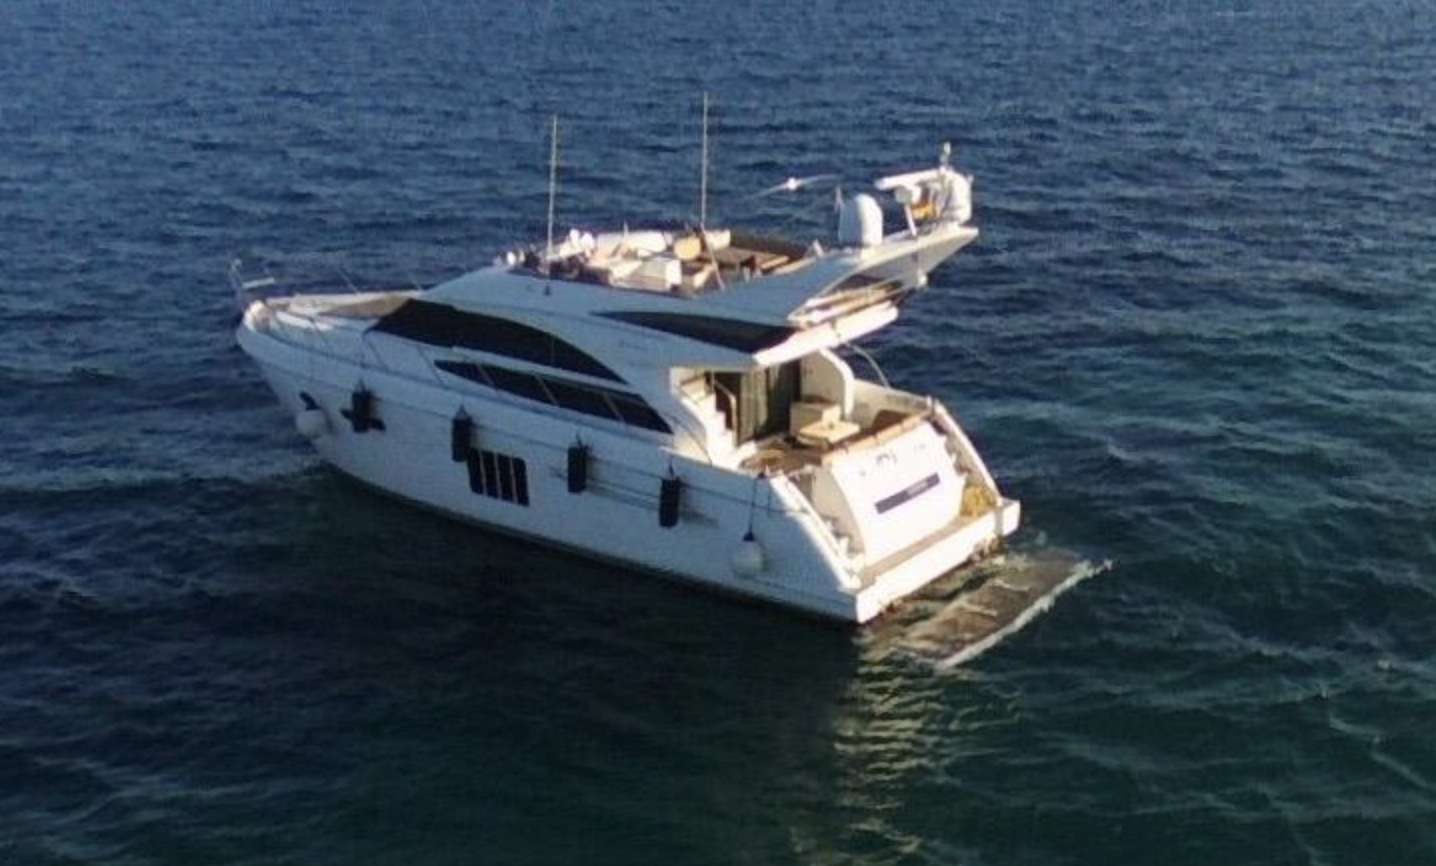 Princess 64 - Luxury yacht charter France & Boat hire in France French Riviera Frejus Port Fréjus 2